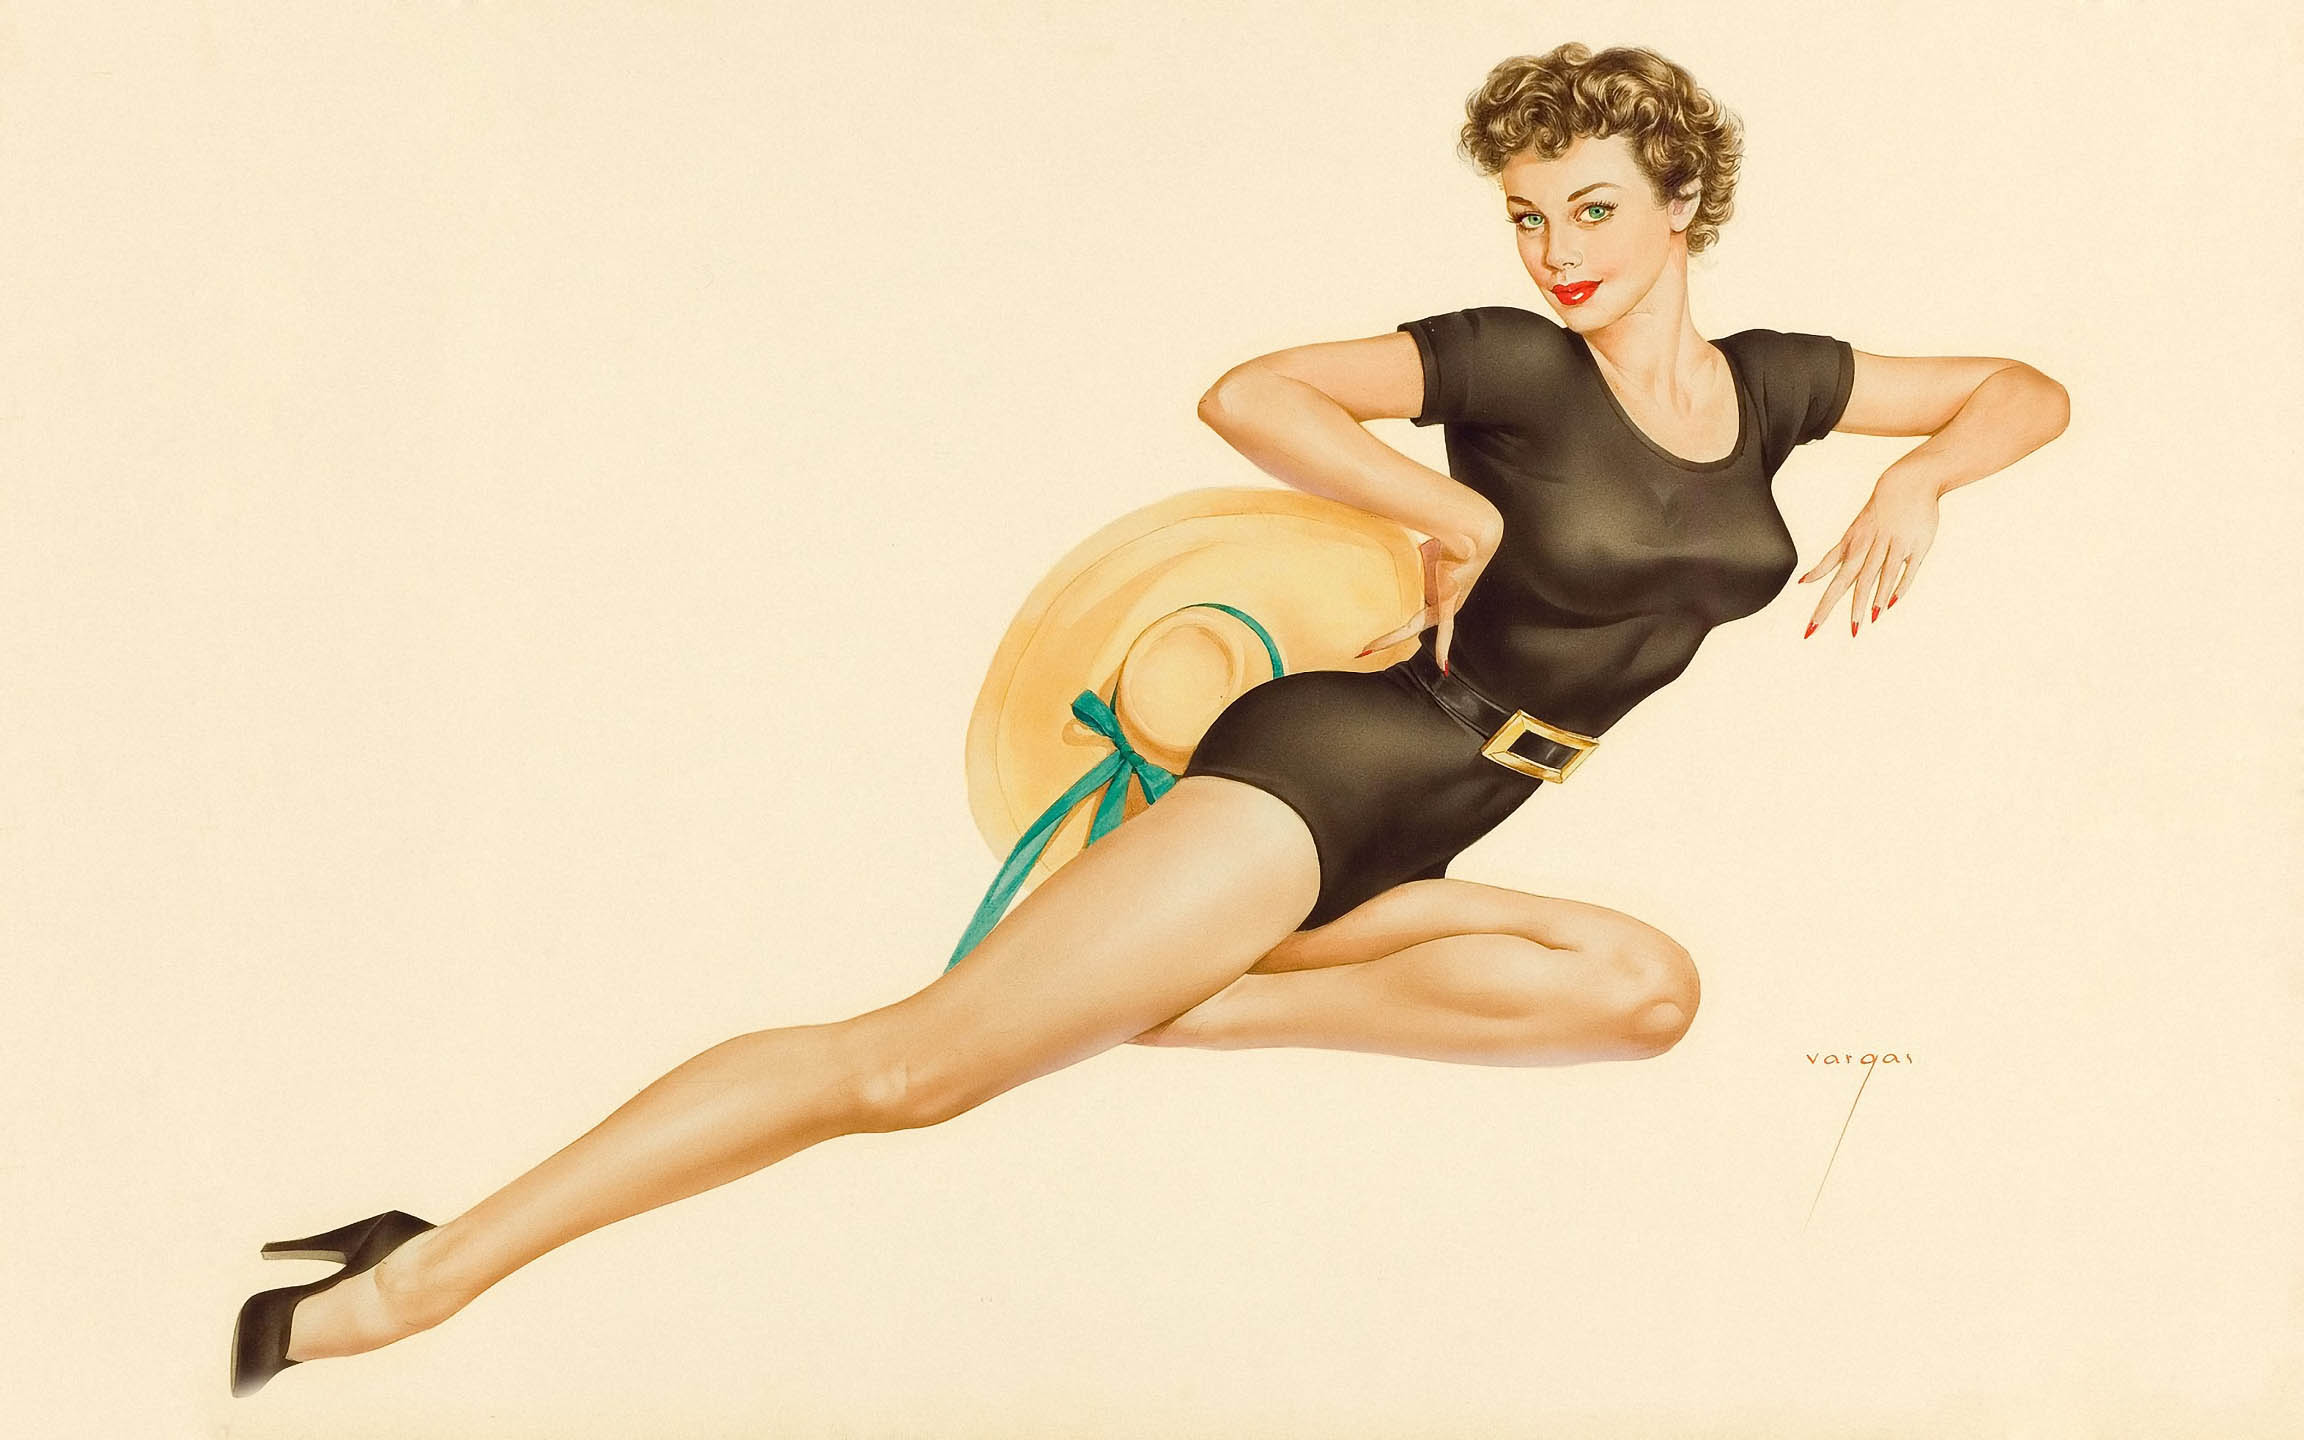 The Collection of Pictures of Vintage Pin-Up Girls - Internet Vibes.